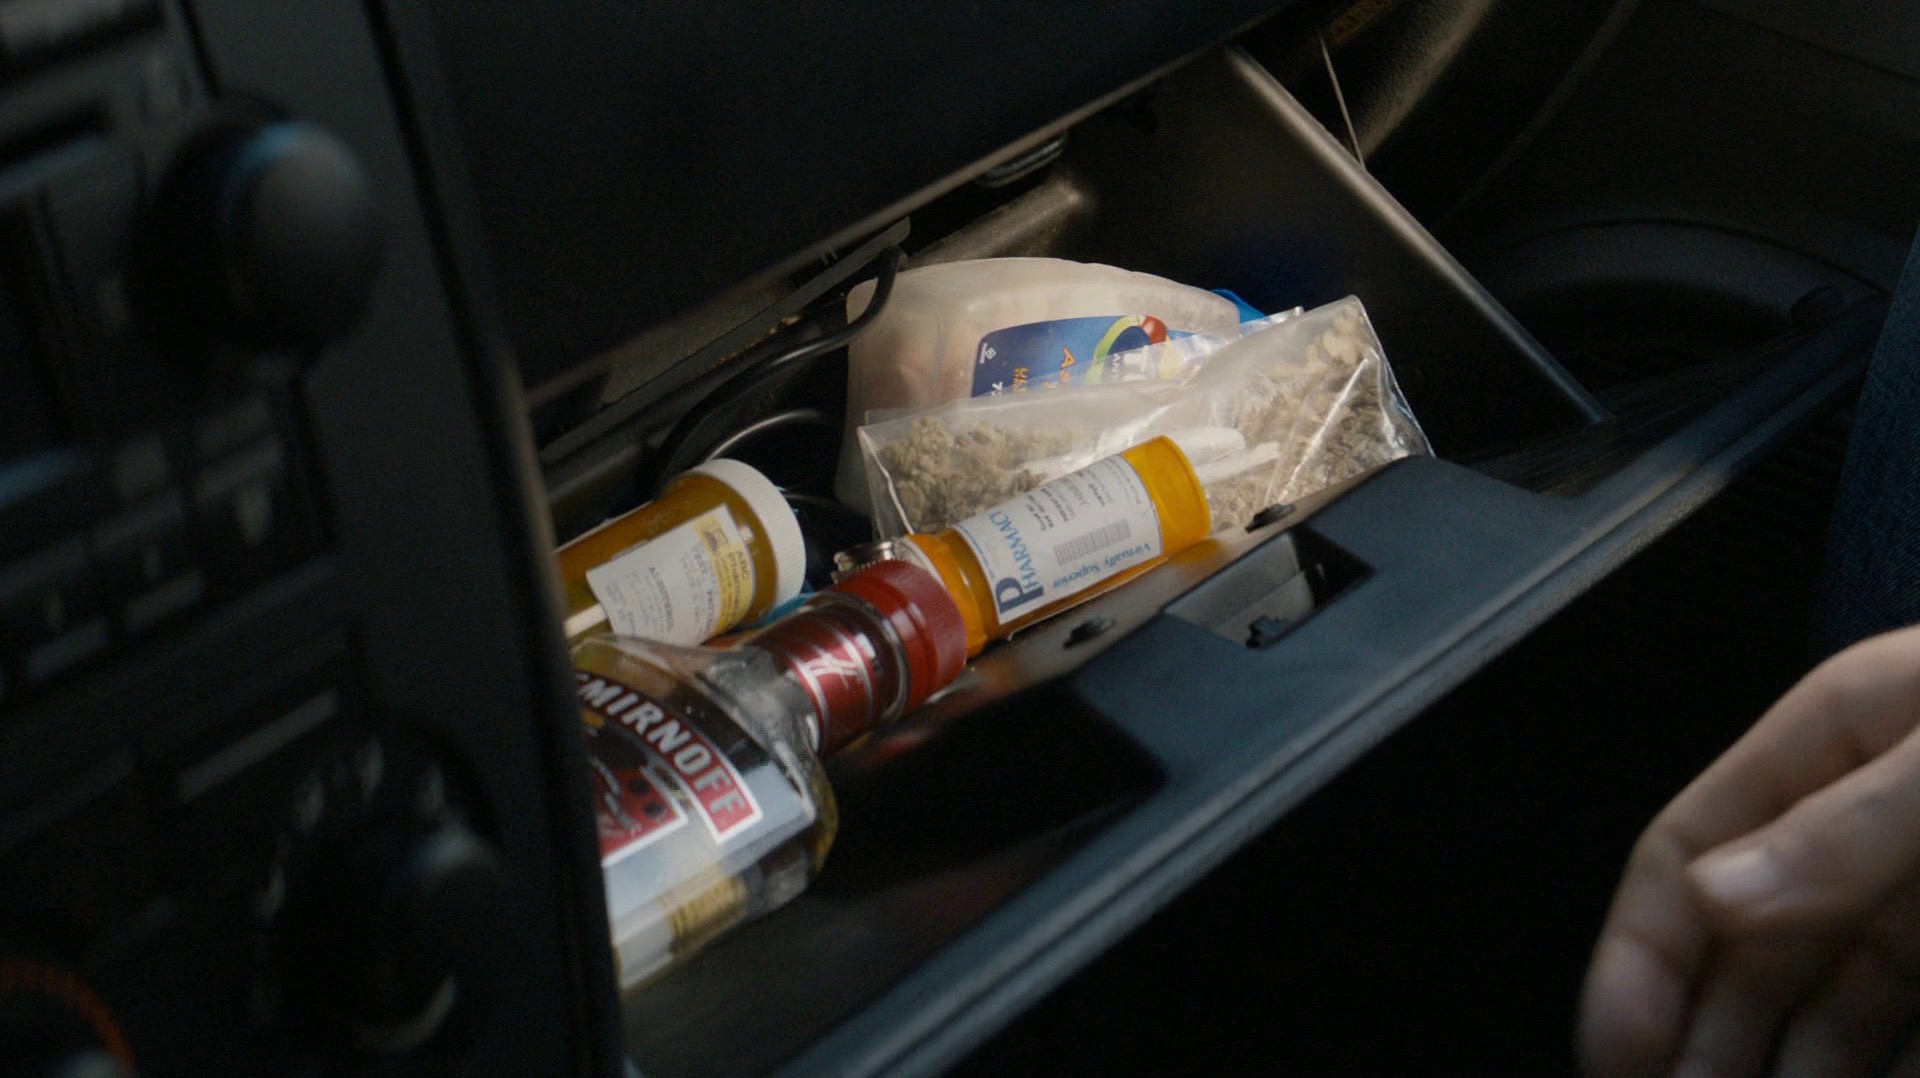 Booze and drugs in Ray's car